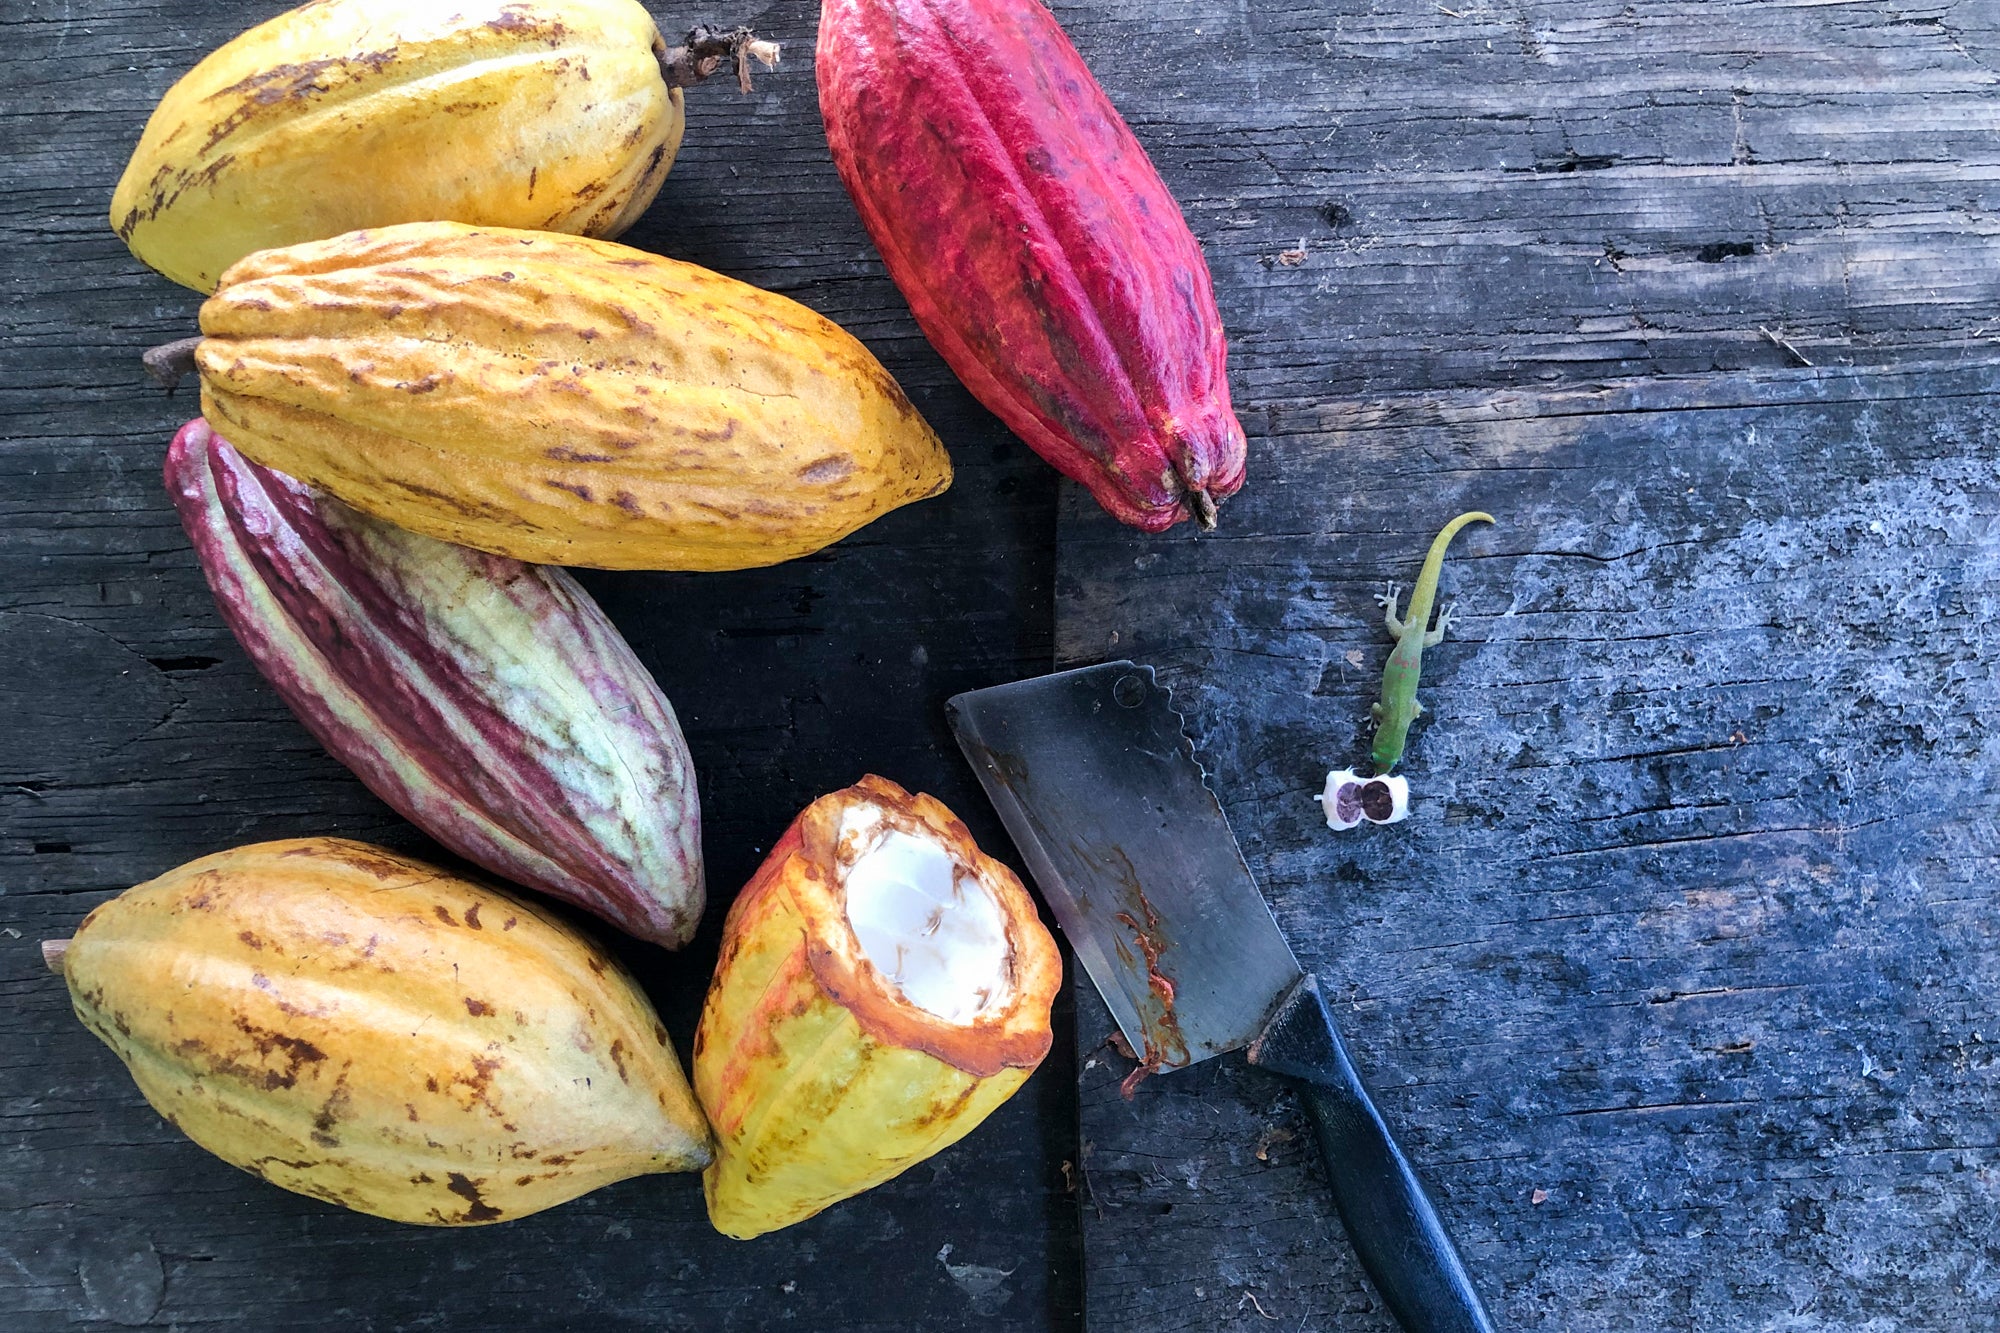 From Farm to Factory: Where Does Chocolate Come From?